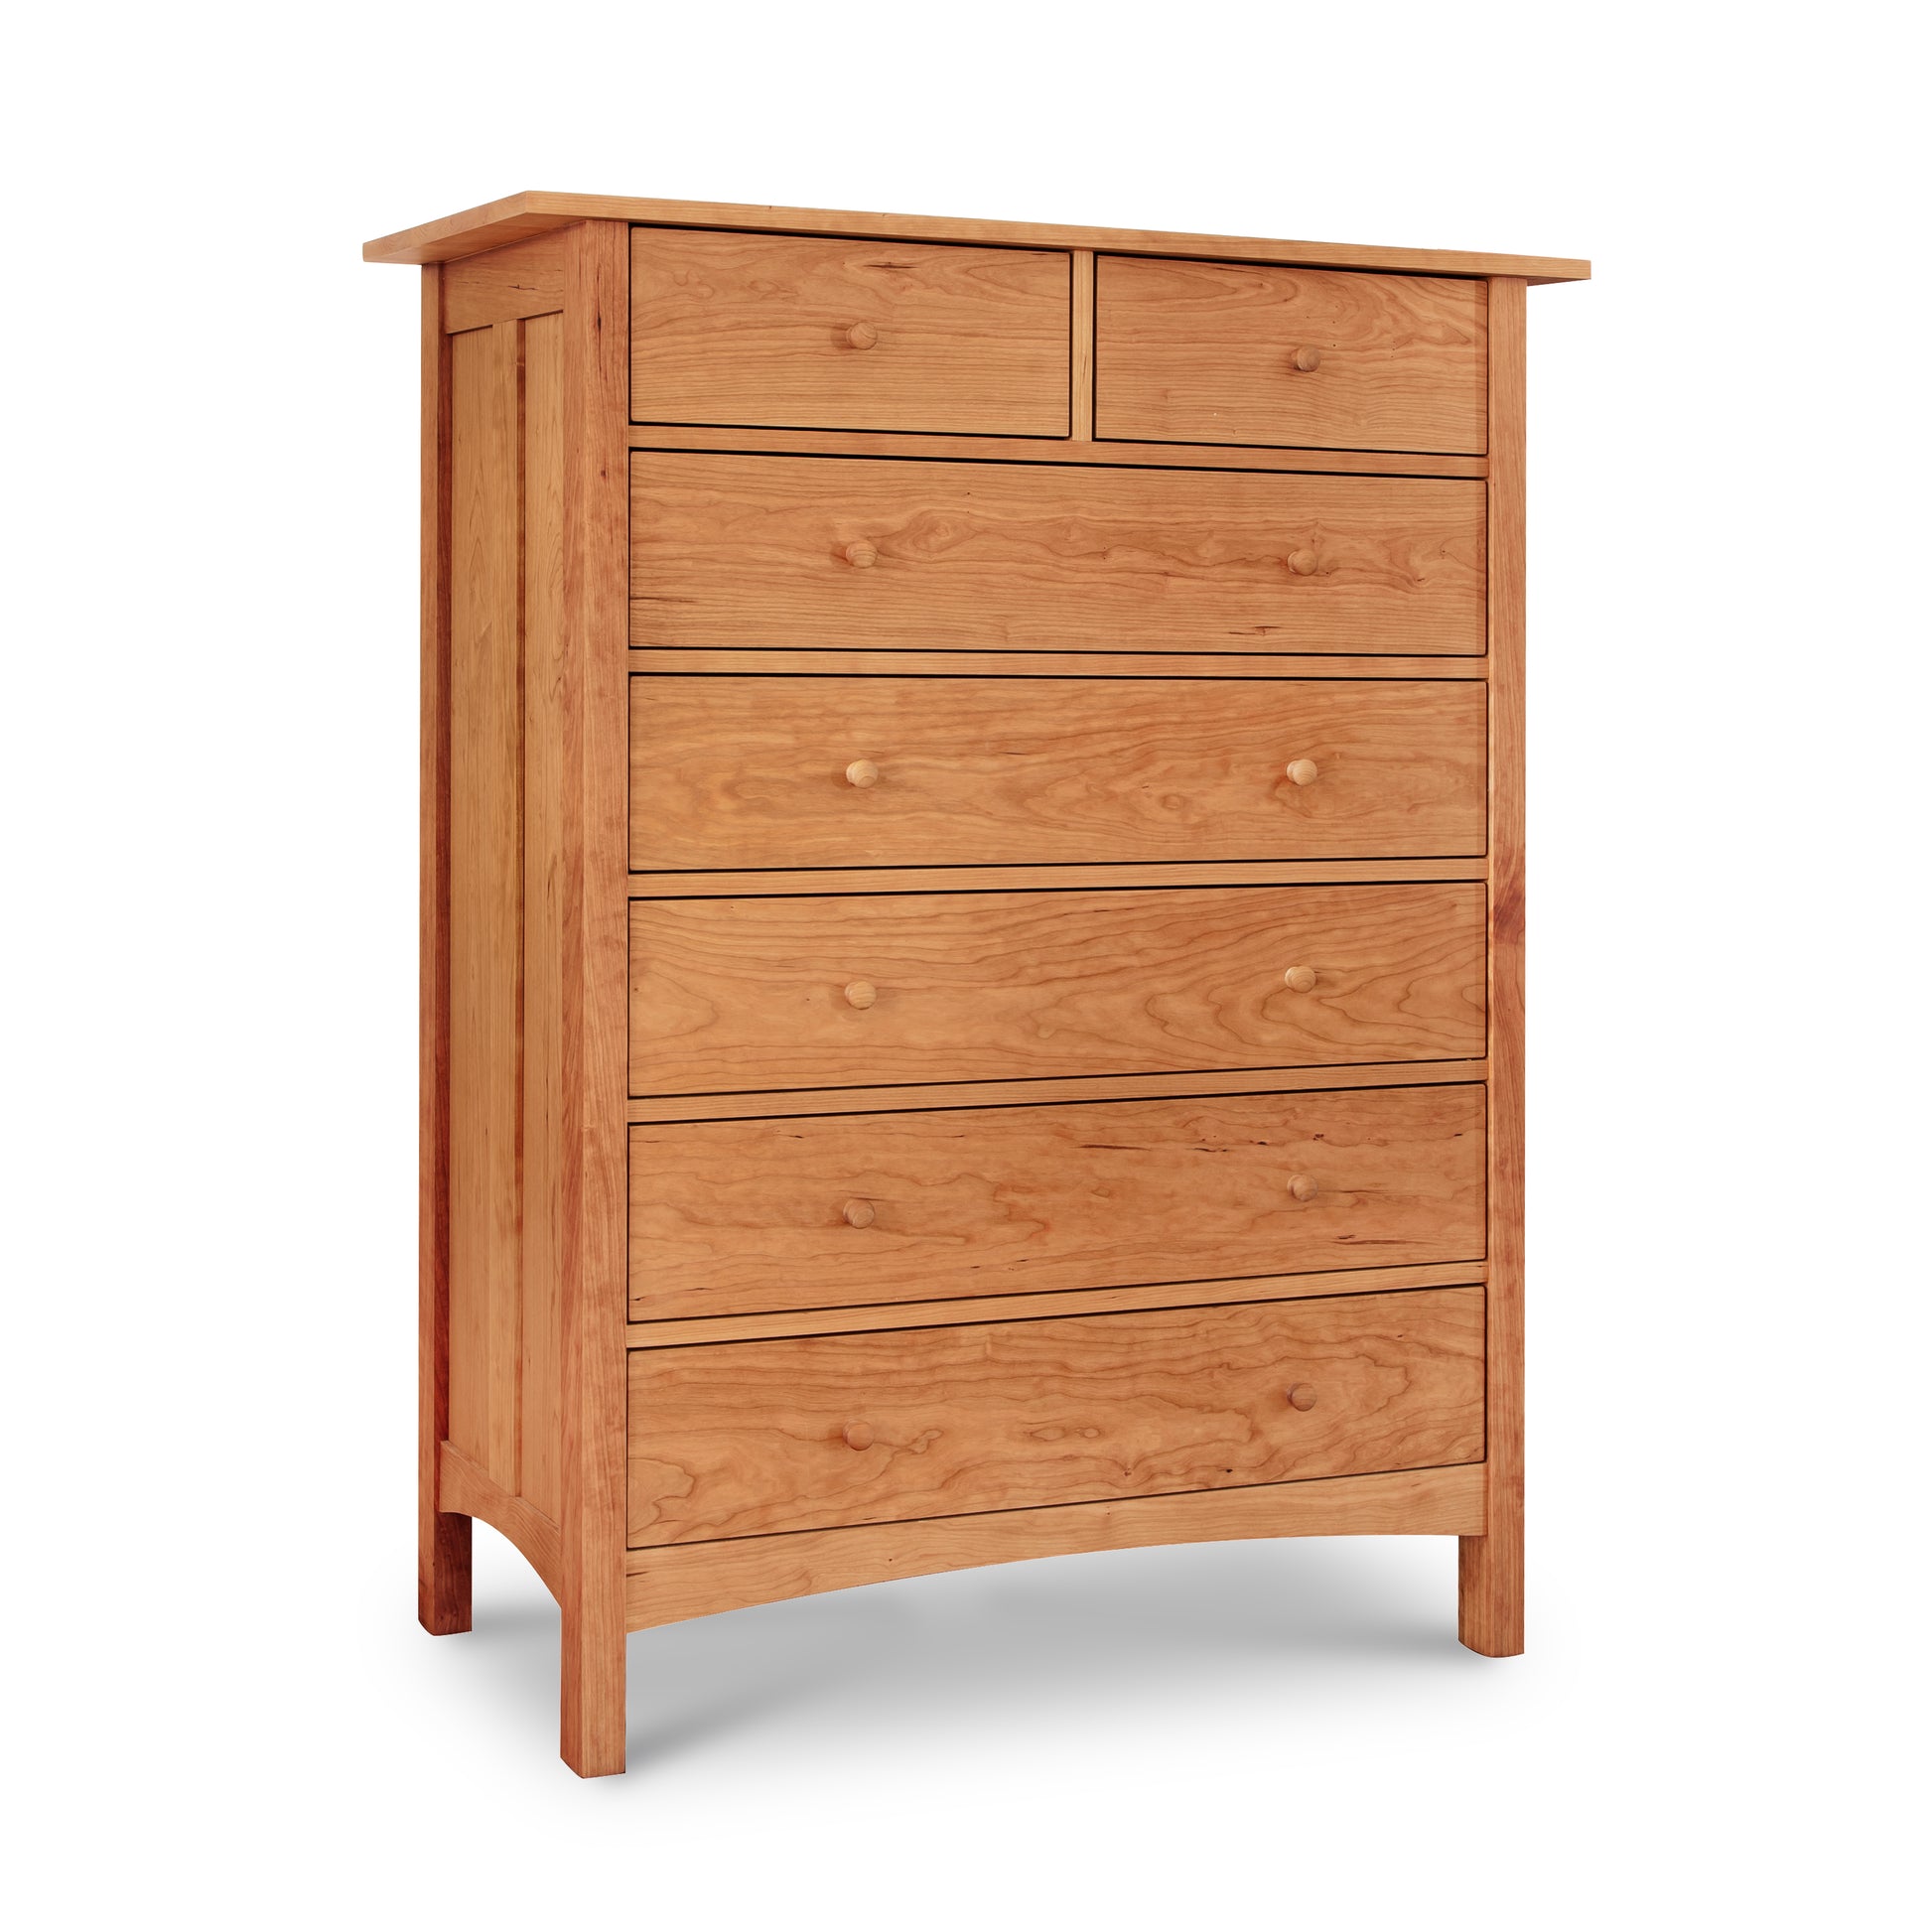 A solid wood Vermont Furniture Designs Burlington Shaker seven-drawer chest isolated on a white background, perfect for a contemporary bedroom.